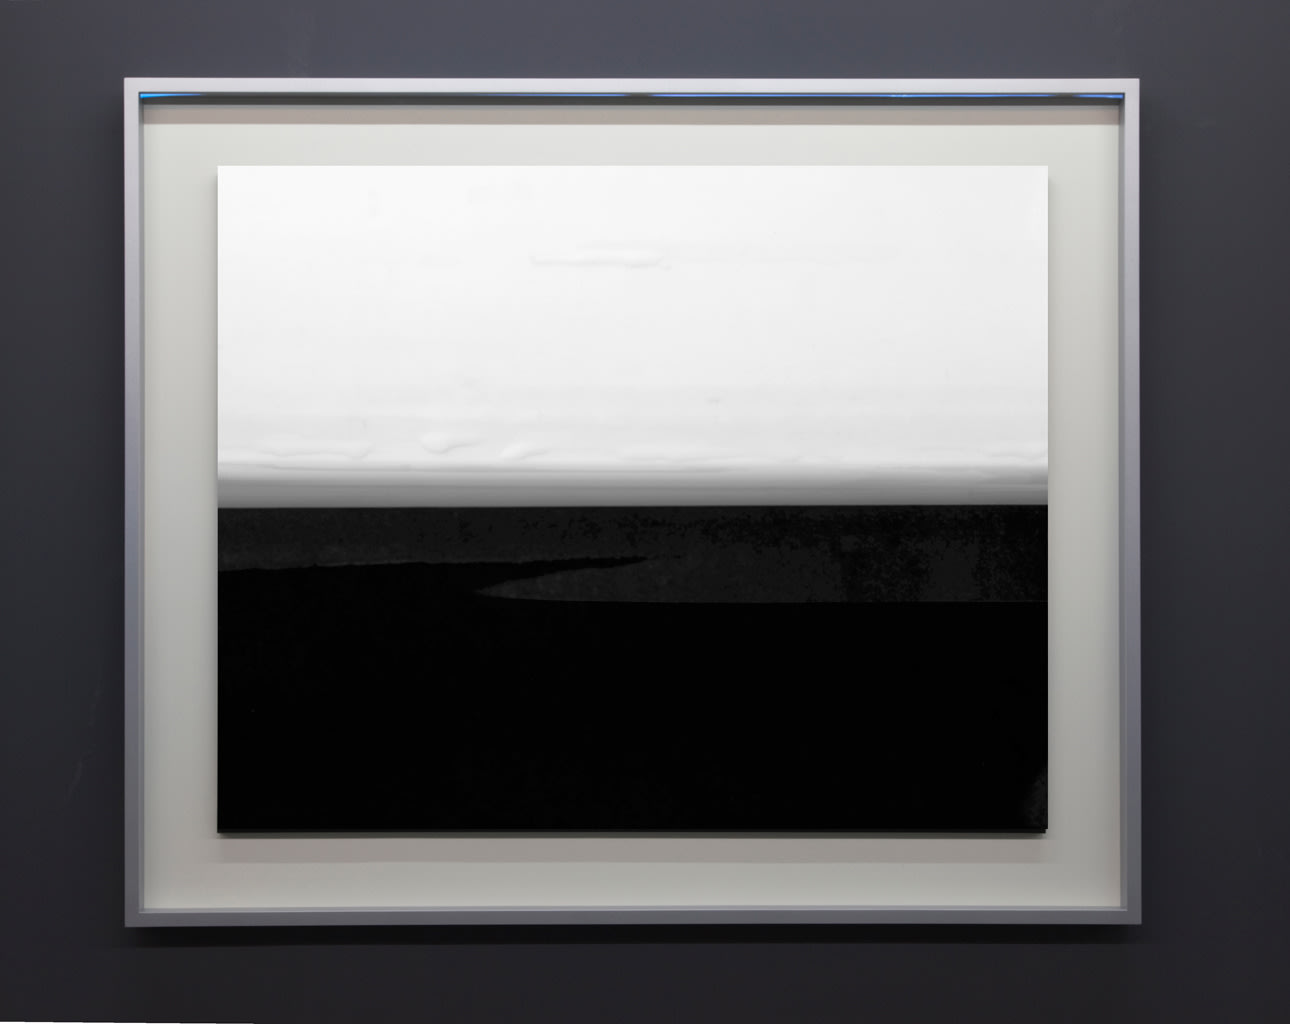 Isabelle Le Minh, Darkroomscapes, after Hiroshi Sugimoto | D52, 2012